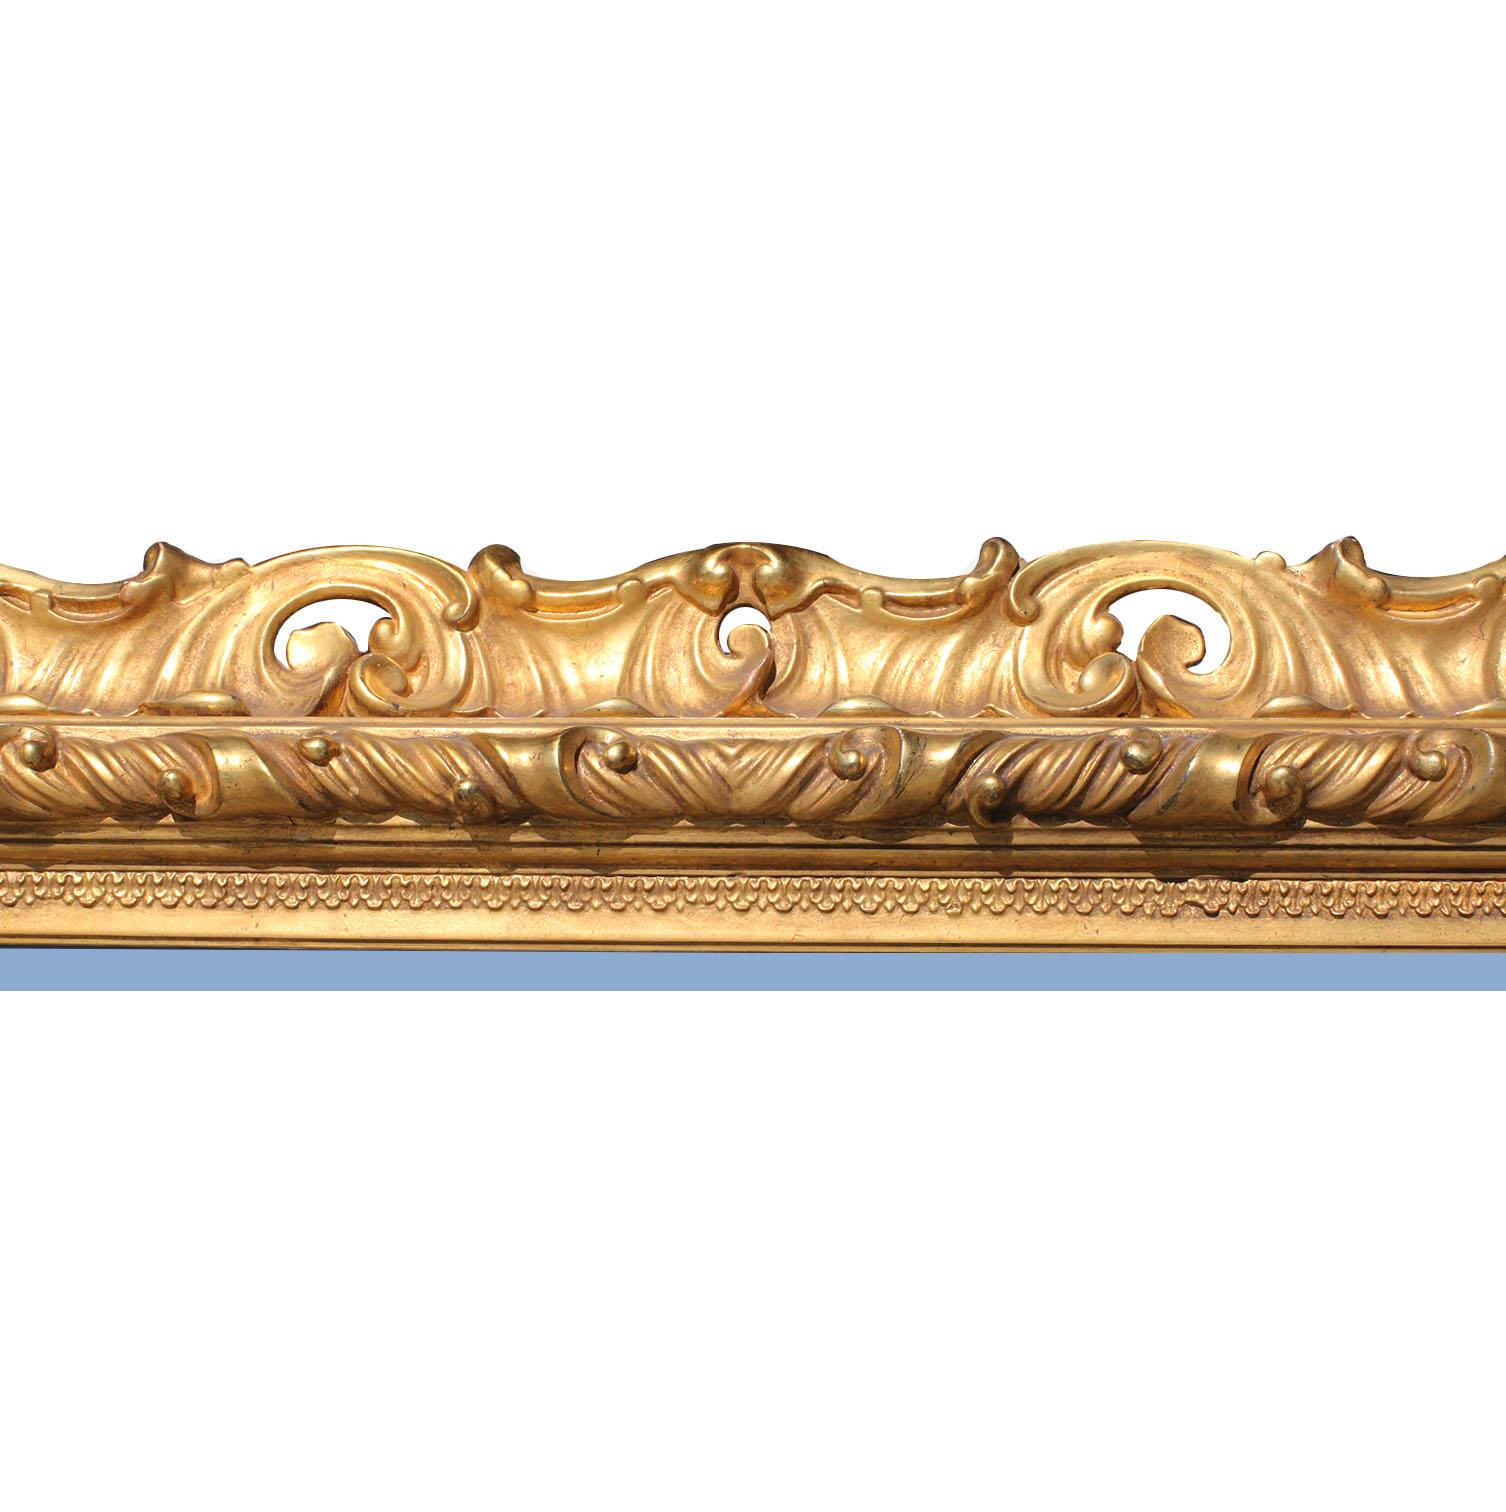 Large Italian 19th Century Baroque Revival Style Giltwood Carved Mirror Frame For Sale 1